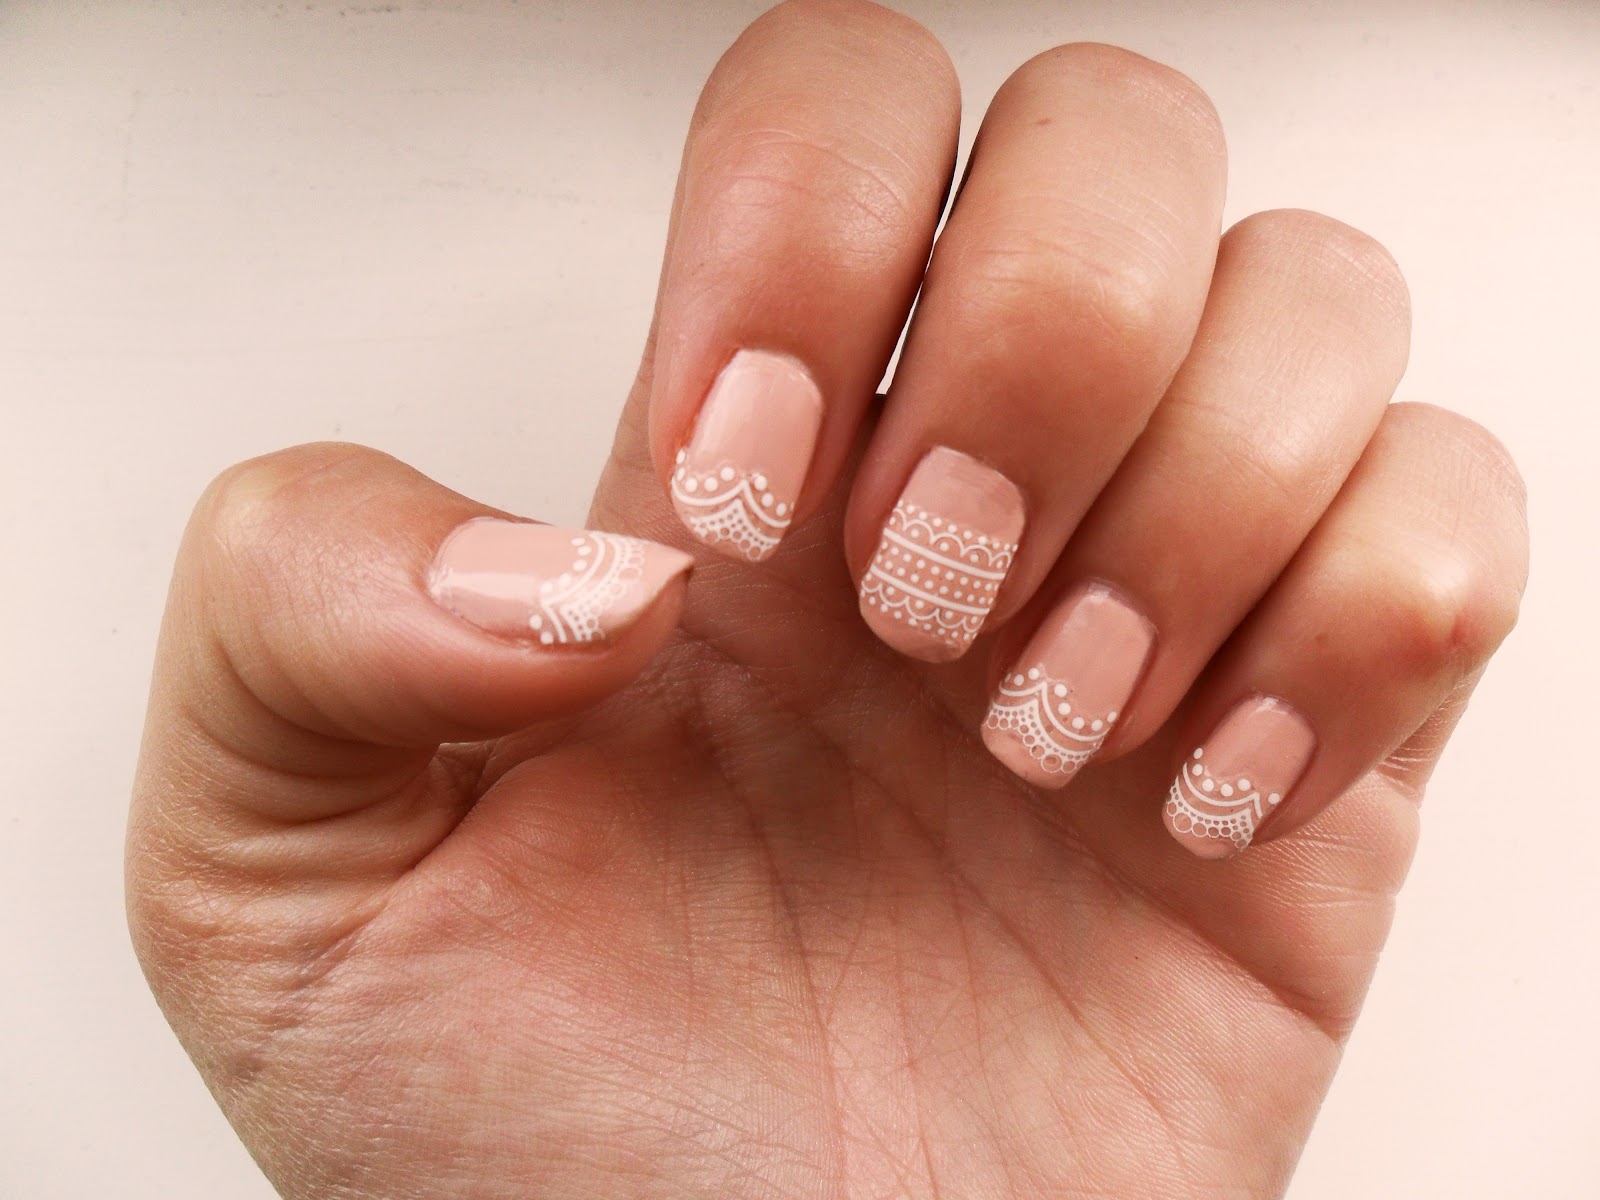 8. Delicate Lace Nails - wide 5